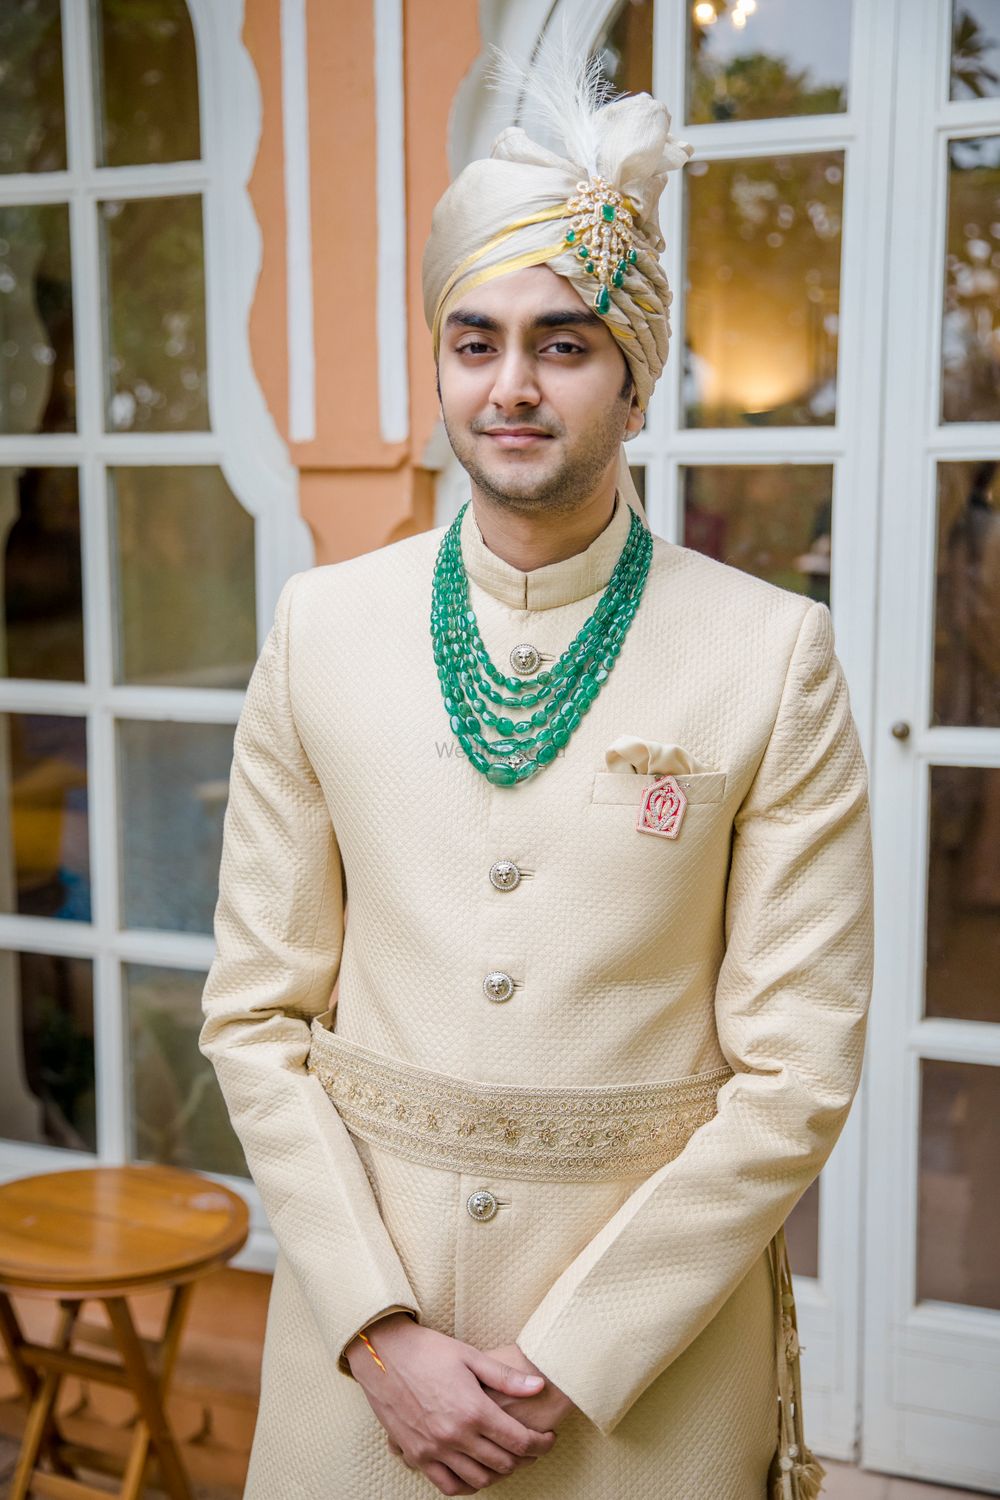 Photo of Groom wearing an off-white sherwani with a layered necklace.